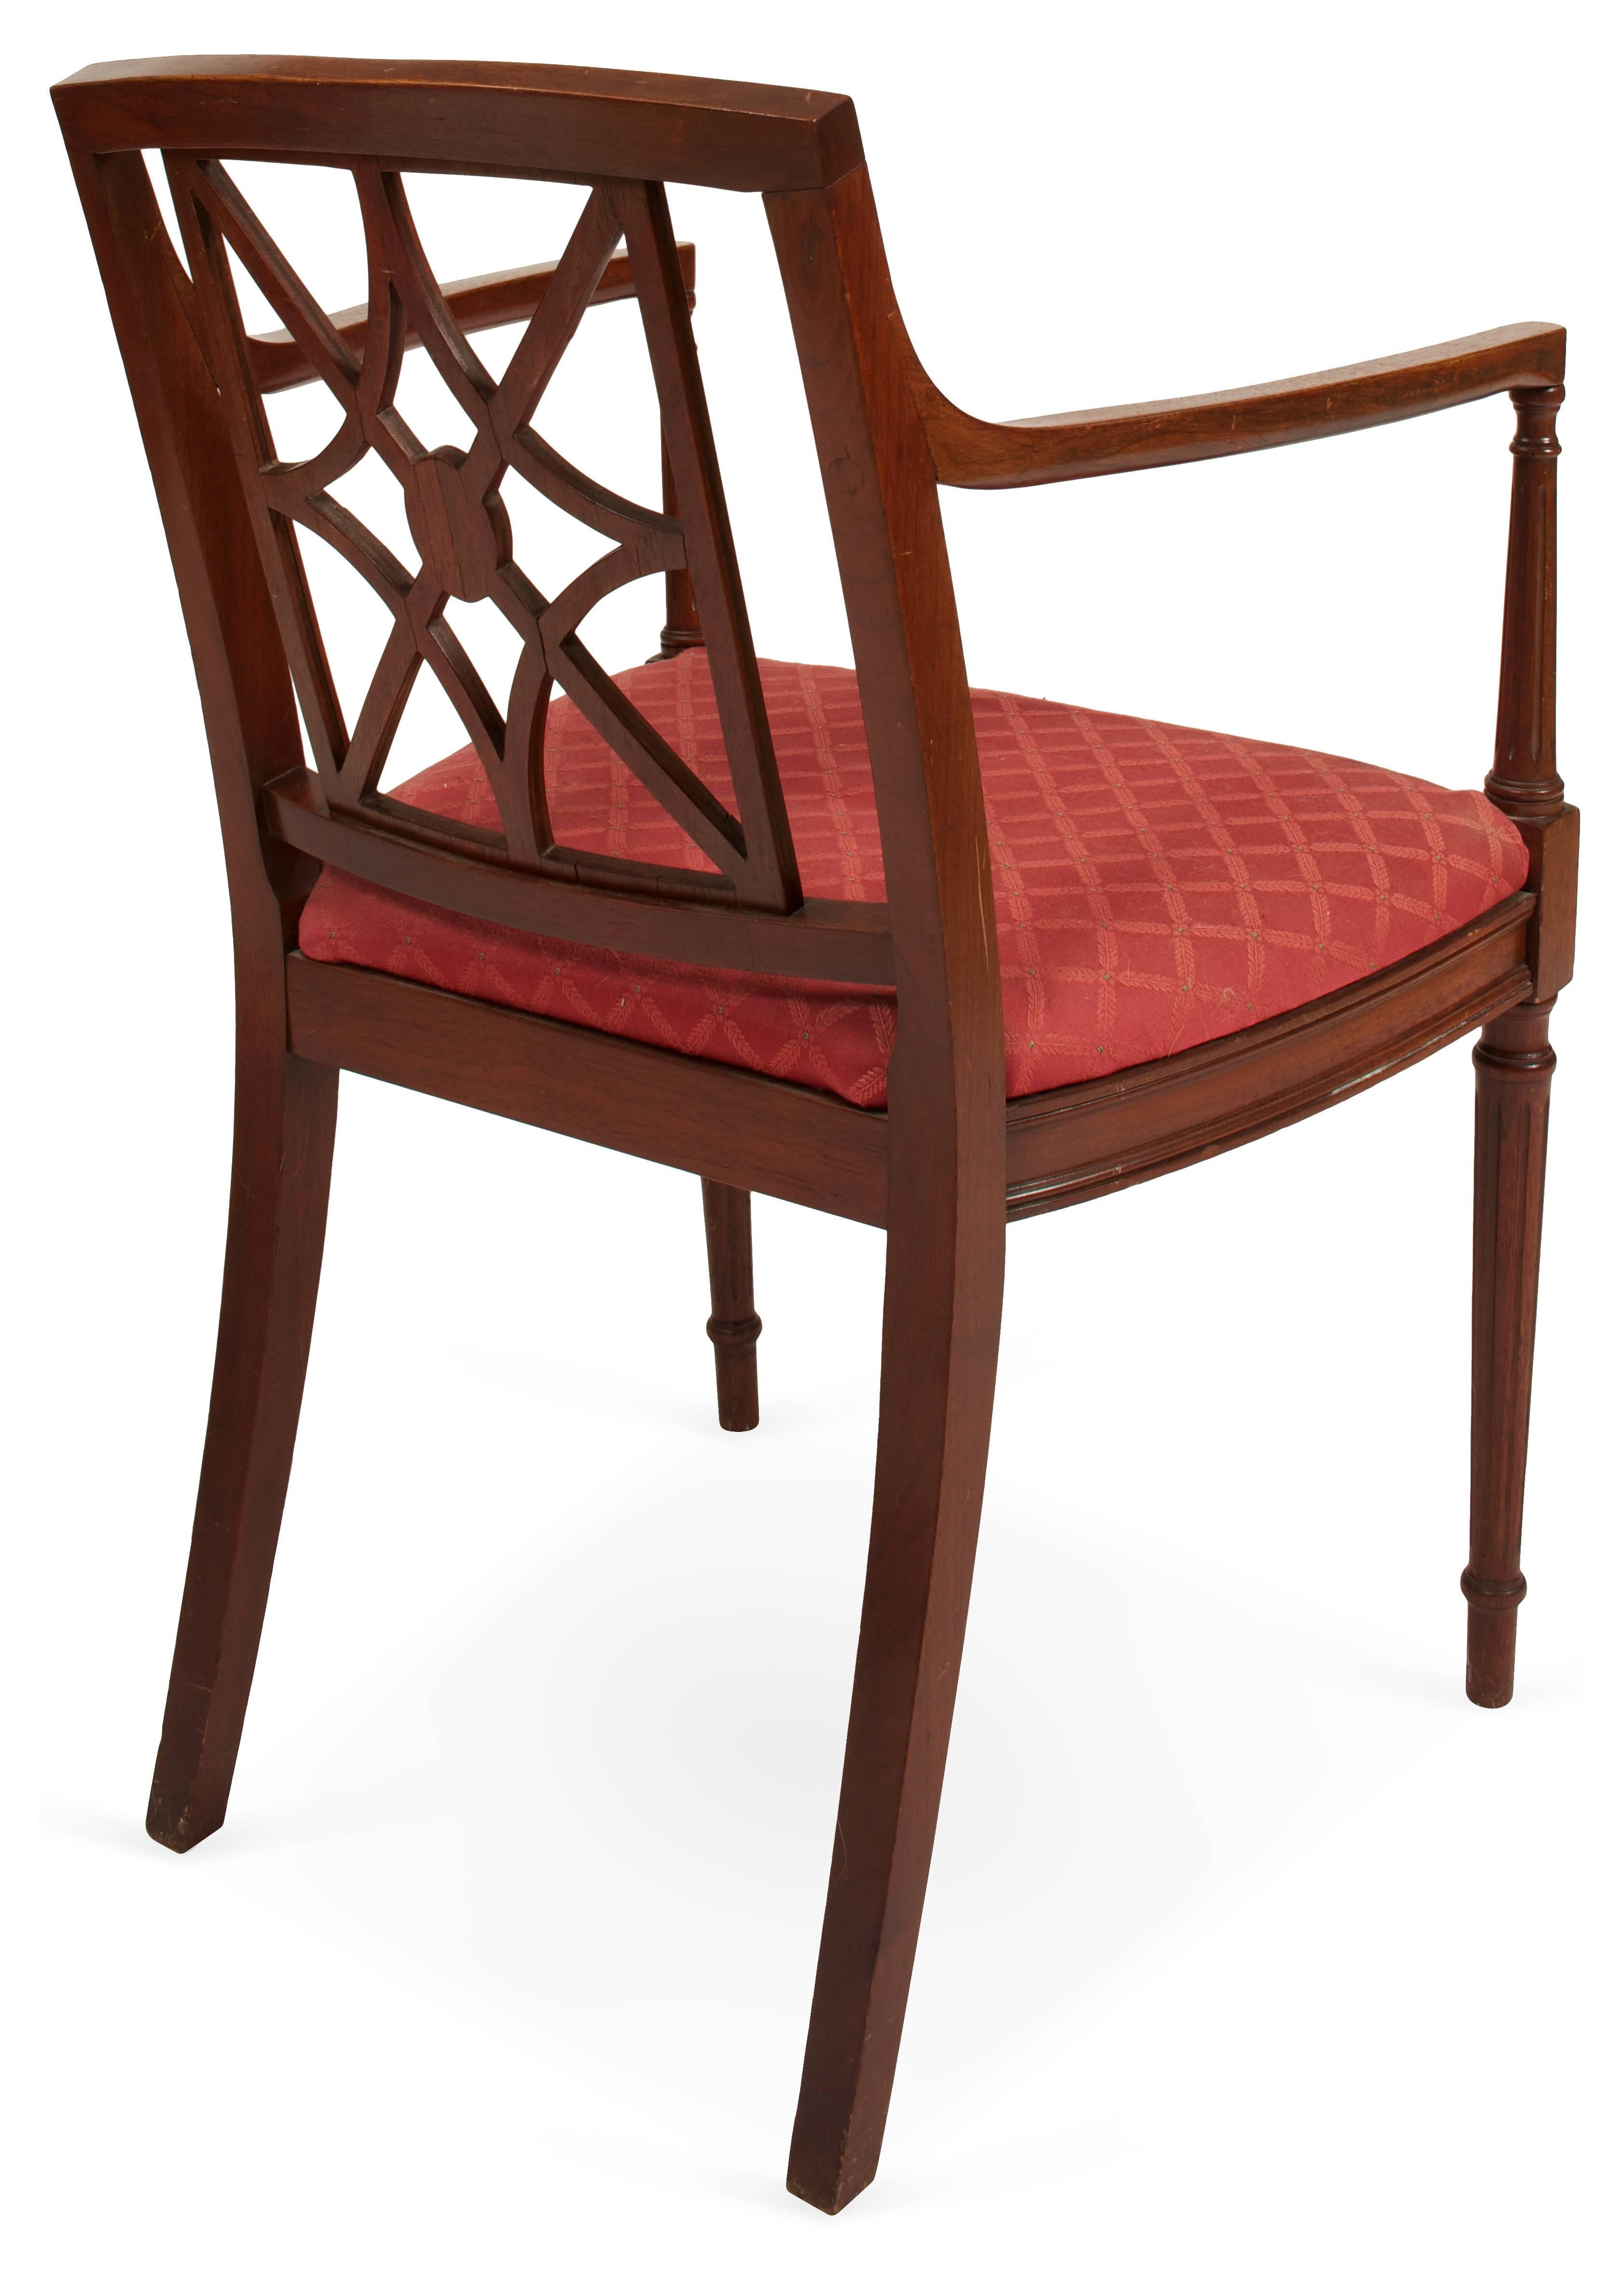 American Sheraton Style Fretwork Armchair For Sale